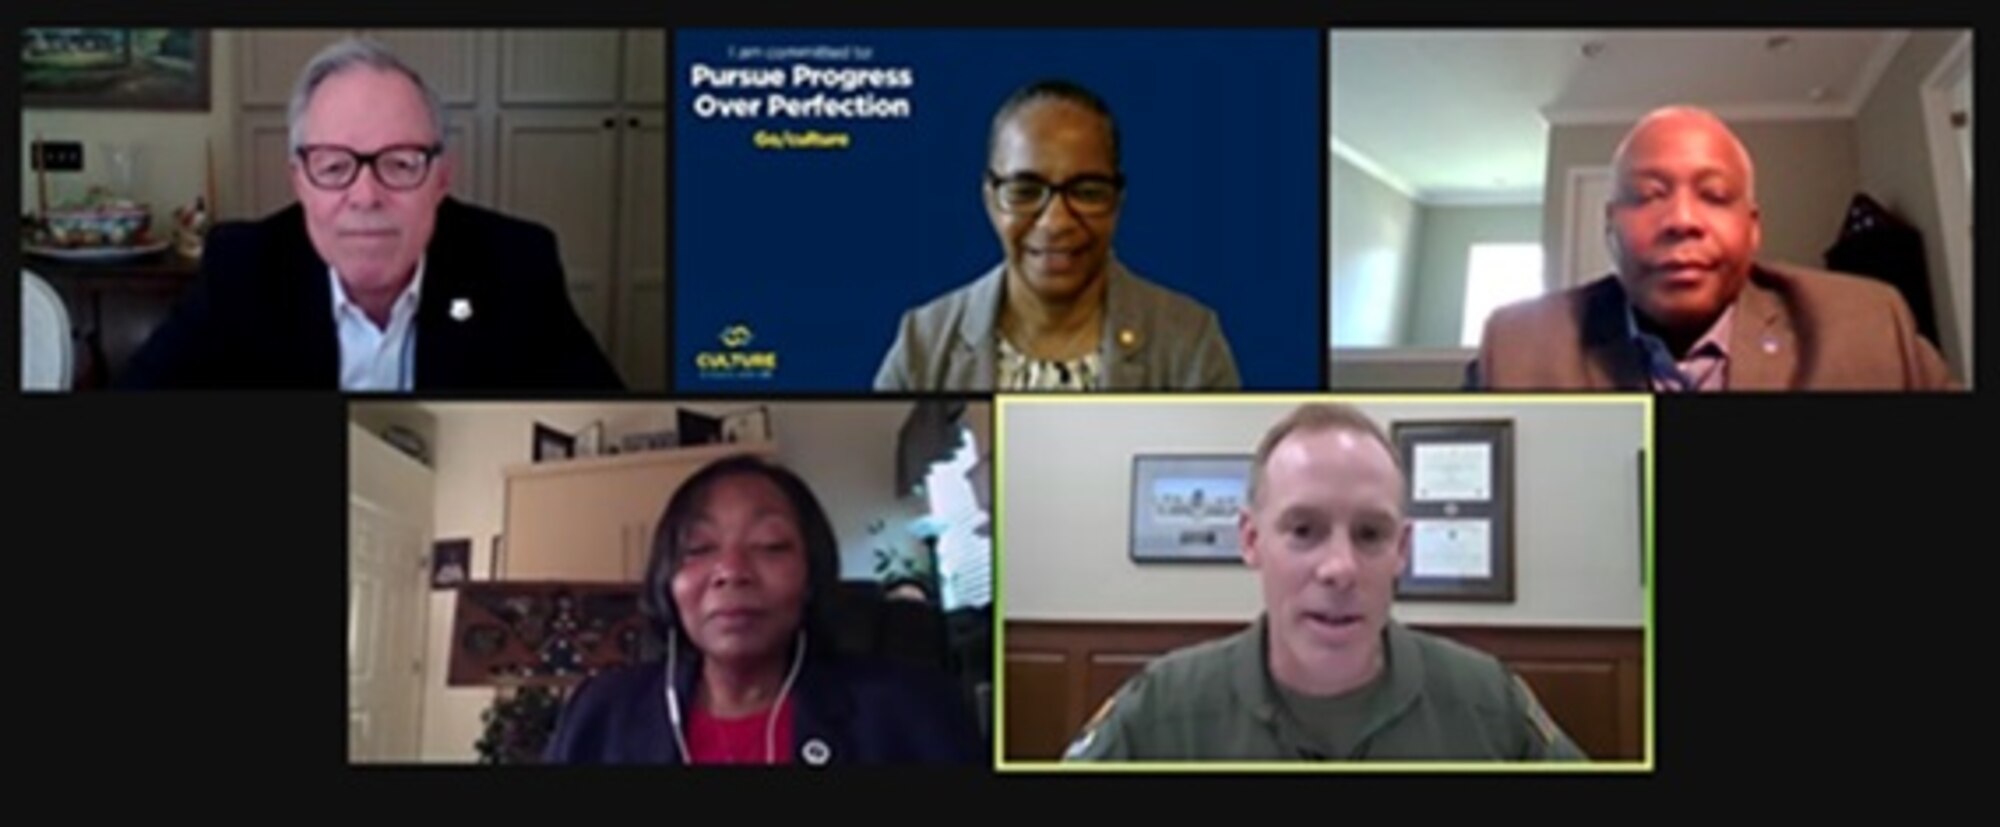 The 6th Aerial Refueling Wing hosted a Tampa civic leader speaker panel during an online event to discuss diversity and inclusion, Feb. 5, 2021.